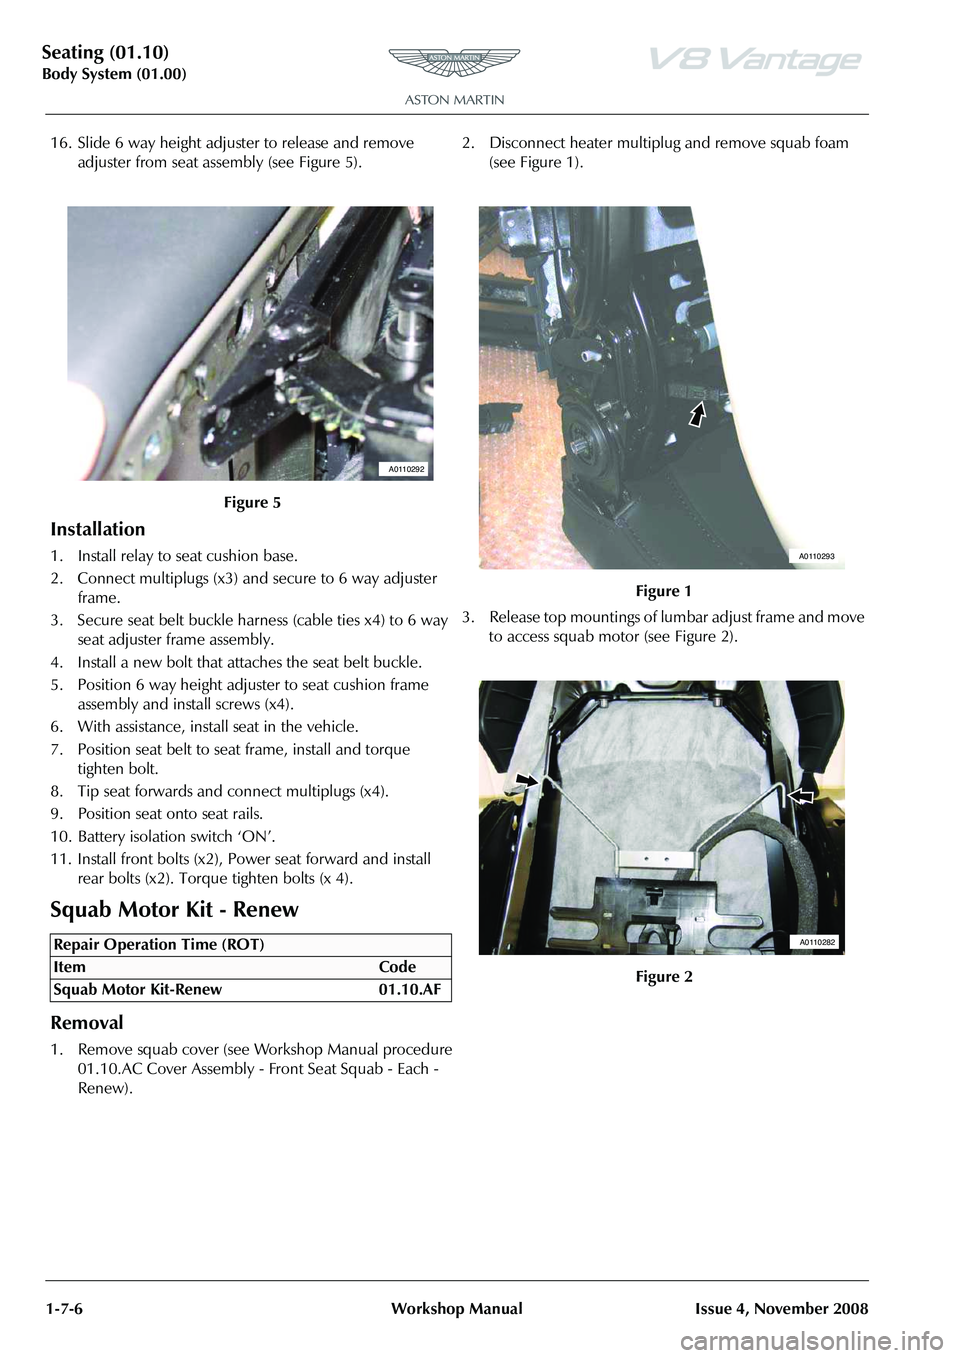 ASTON MARTIN V8 VANTAGE 2010  Workshop Manual Seating (01.10)
Body System (01.00)1-7-6 Workshop Manual Issue 4, November 2008
16. Slide 6 way height adjuster to release and remove  adjuster from seat assembly (see Figure 5).
Installation
1. Insta